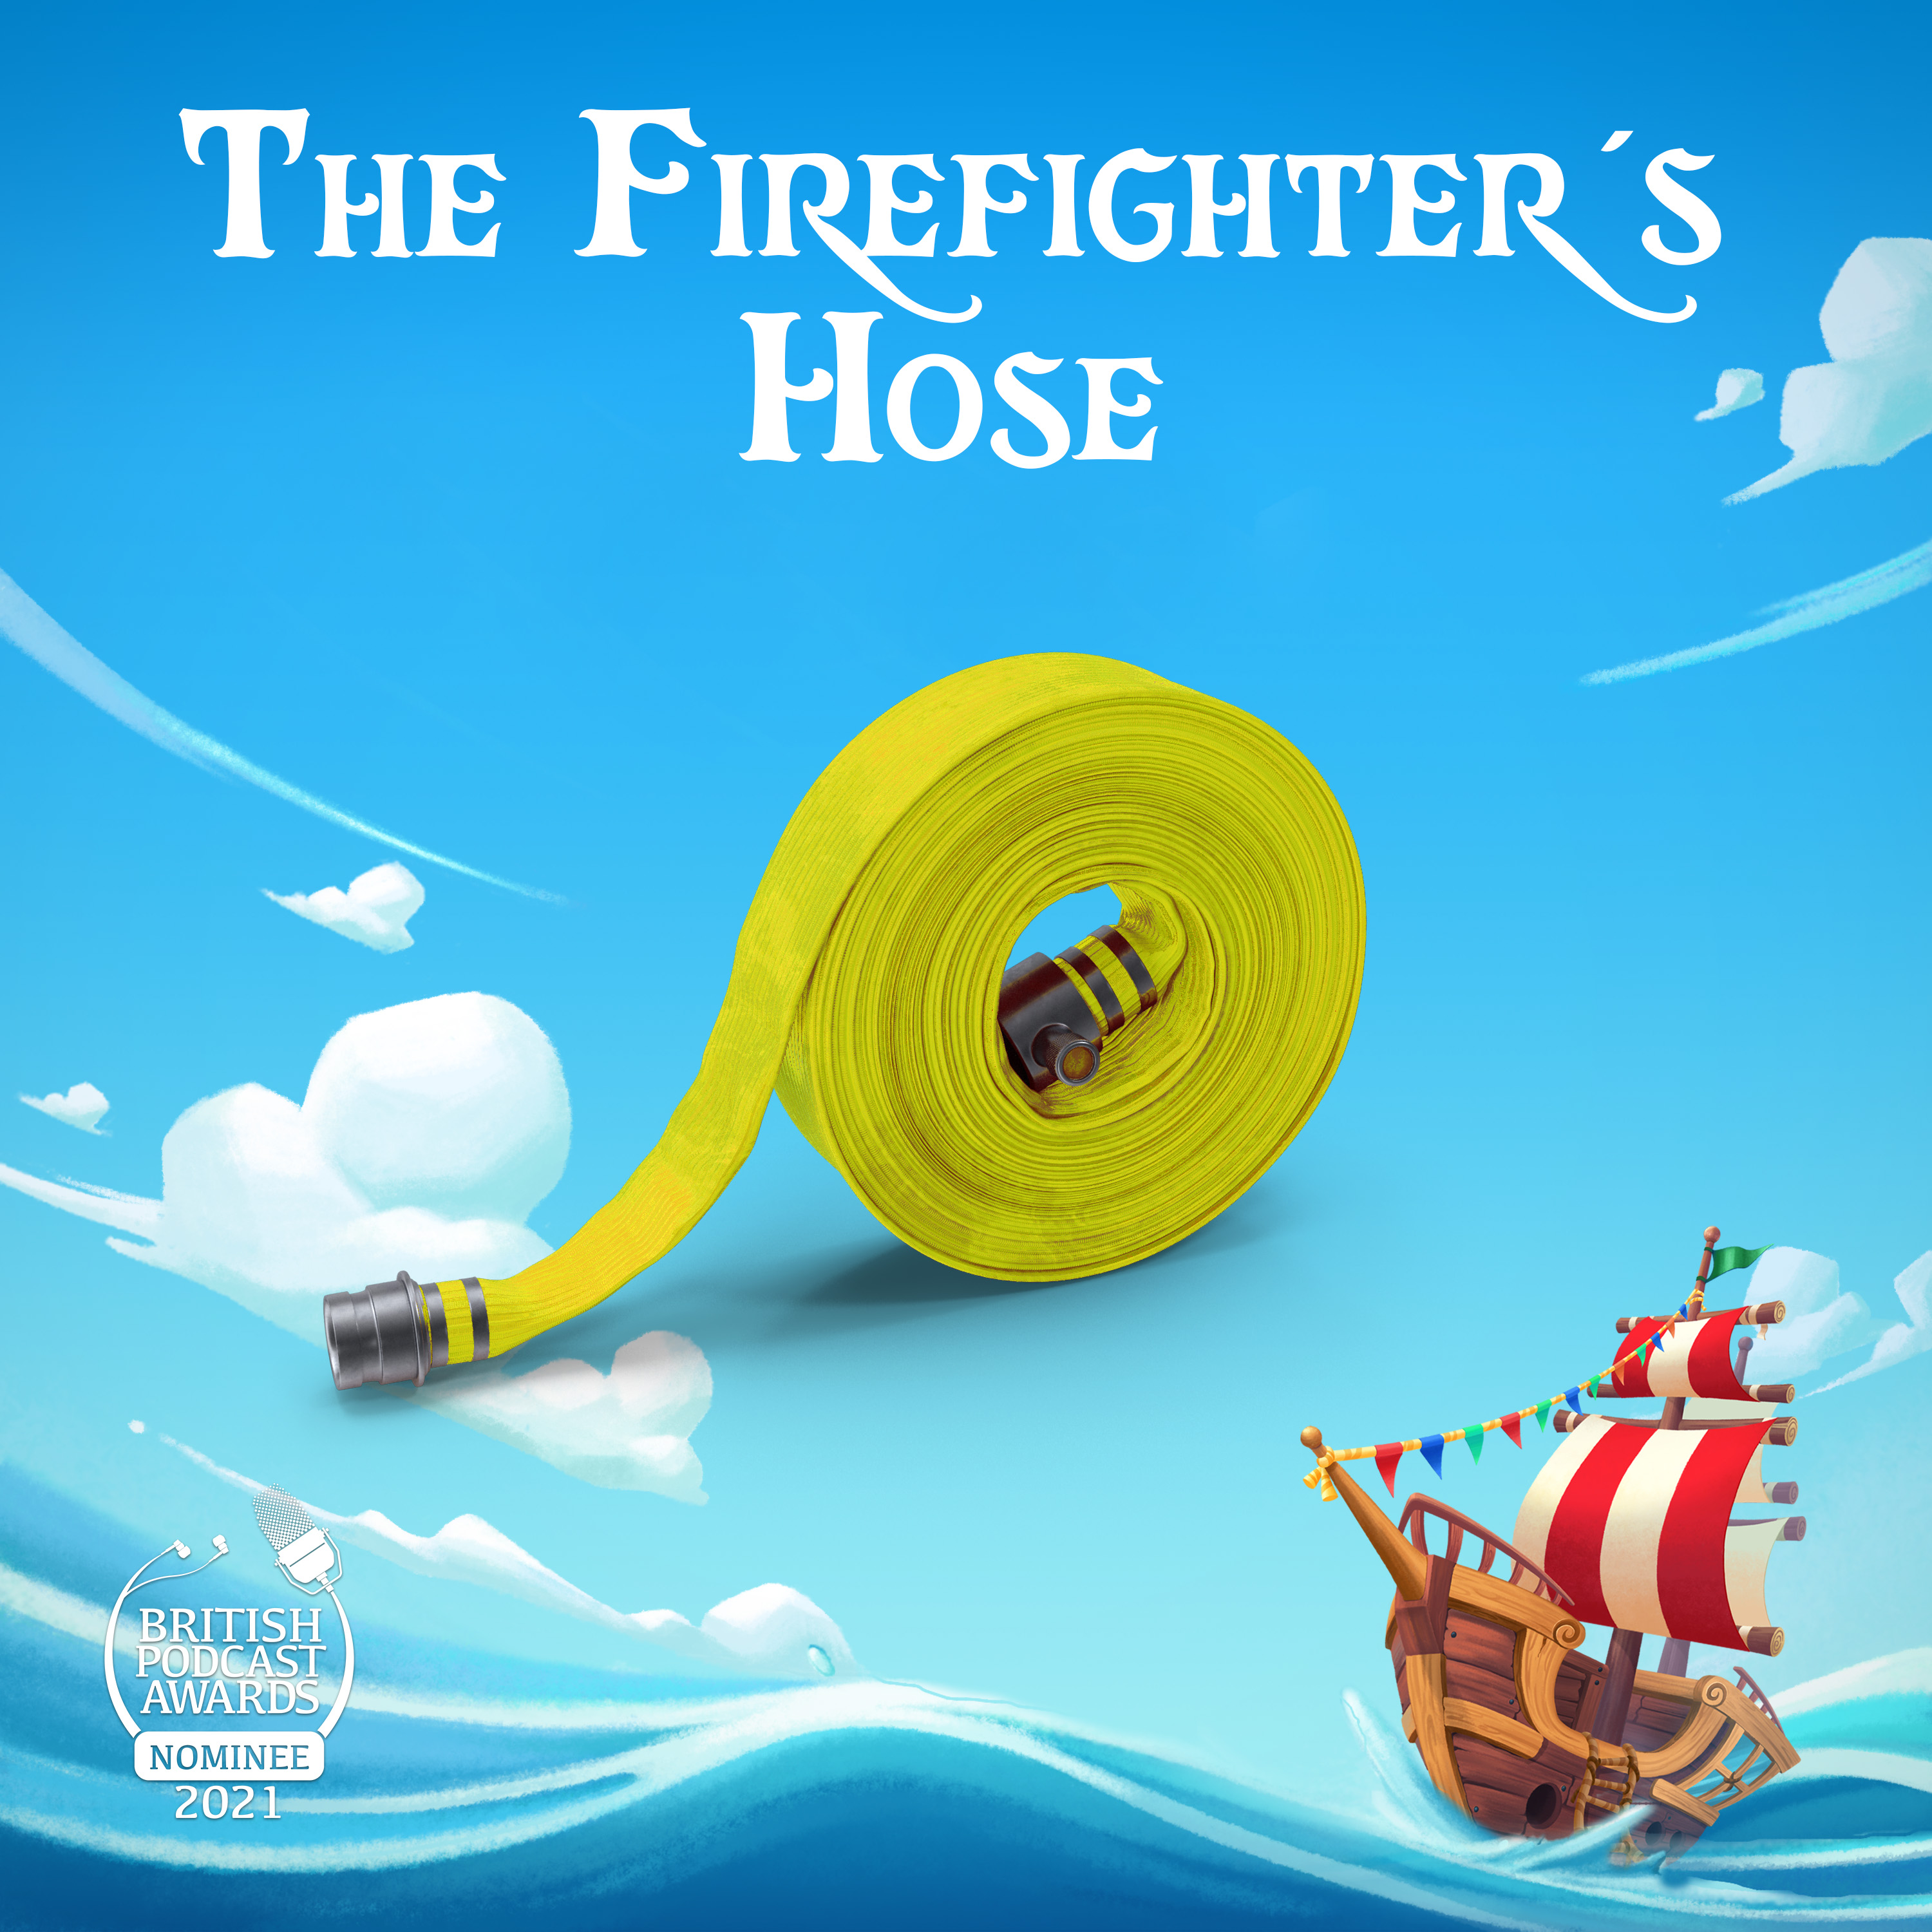 The Firefighter’s Hose